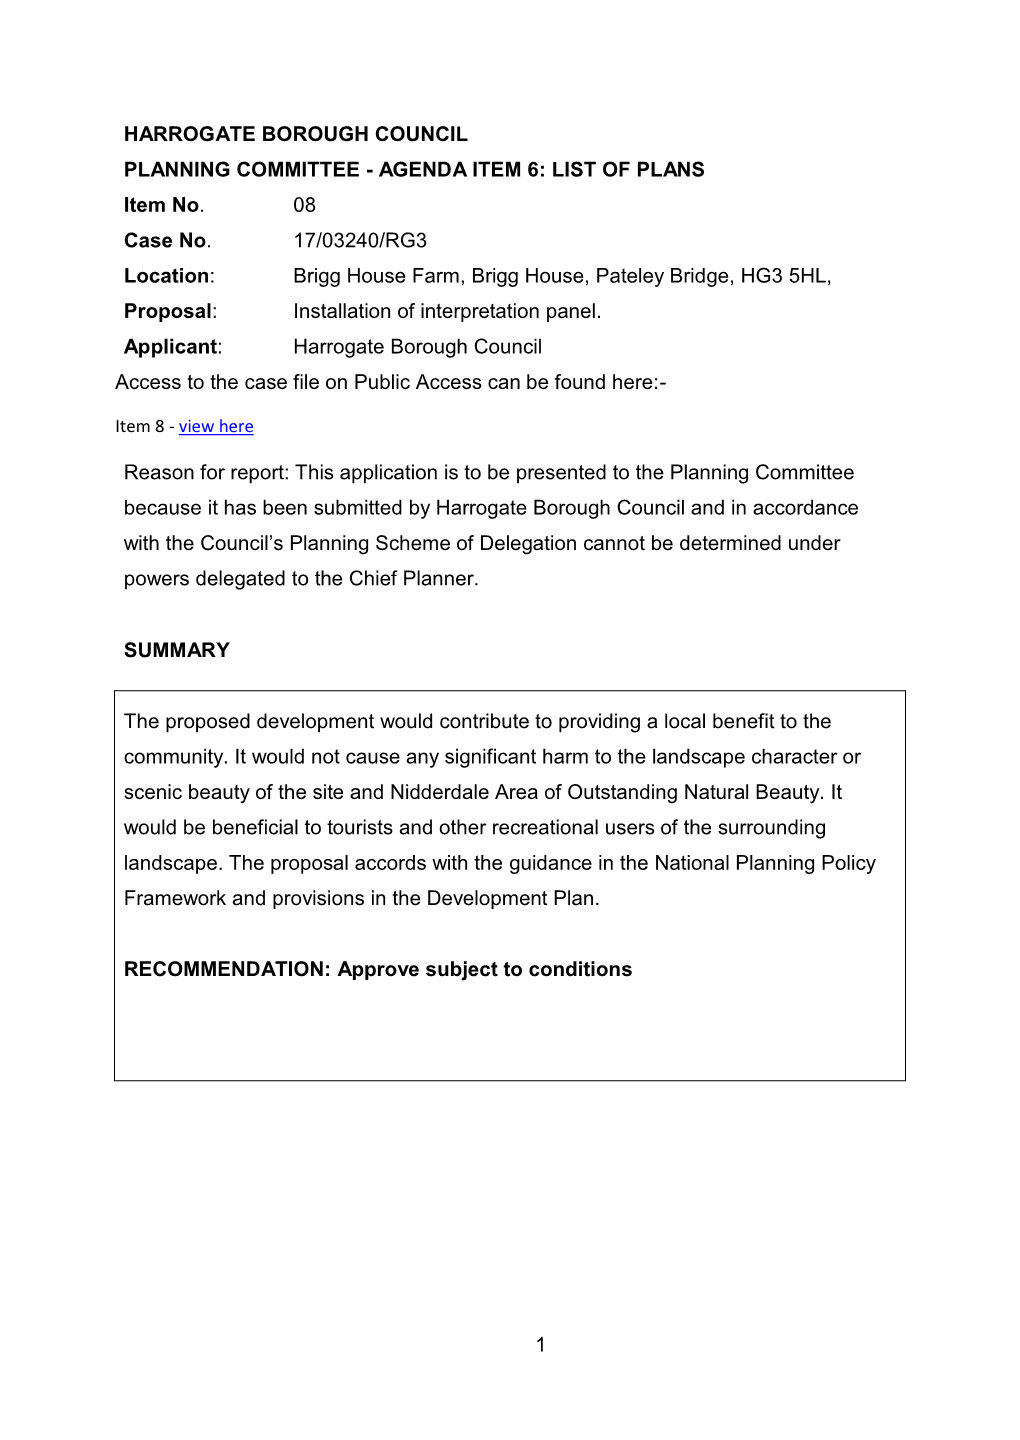 1 Harrogate Borough Council Planning Committee